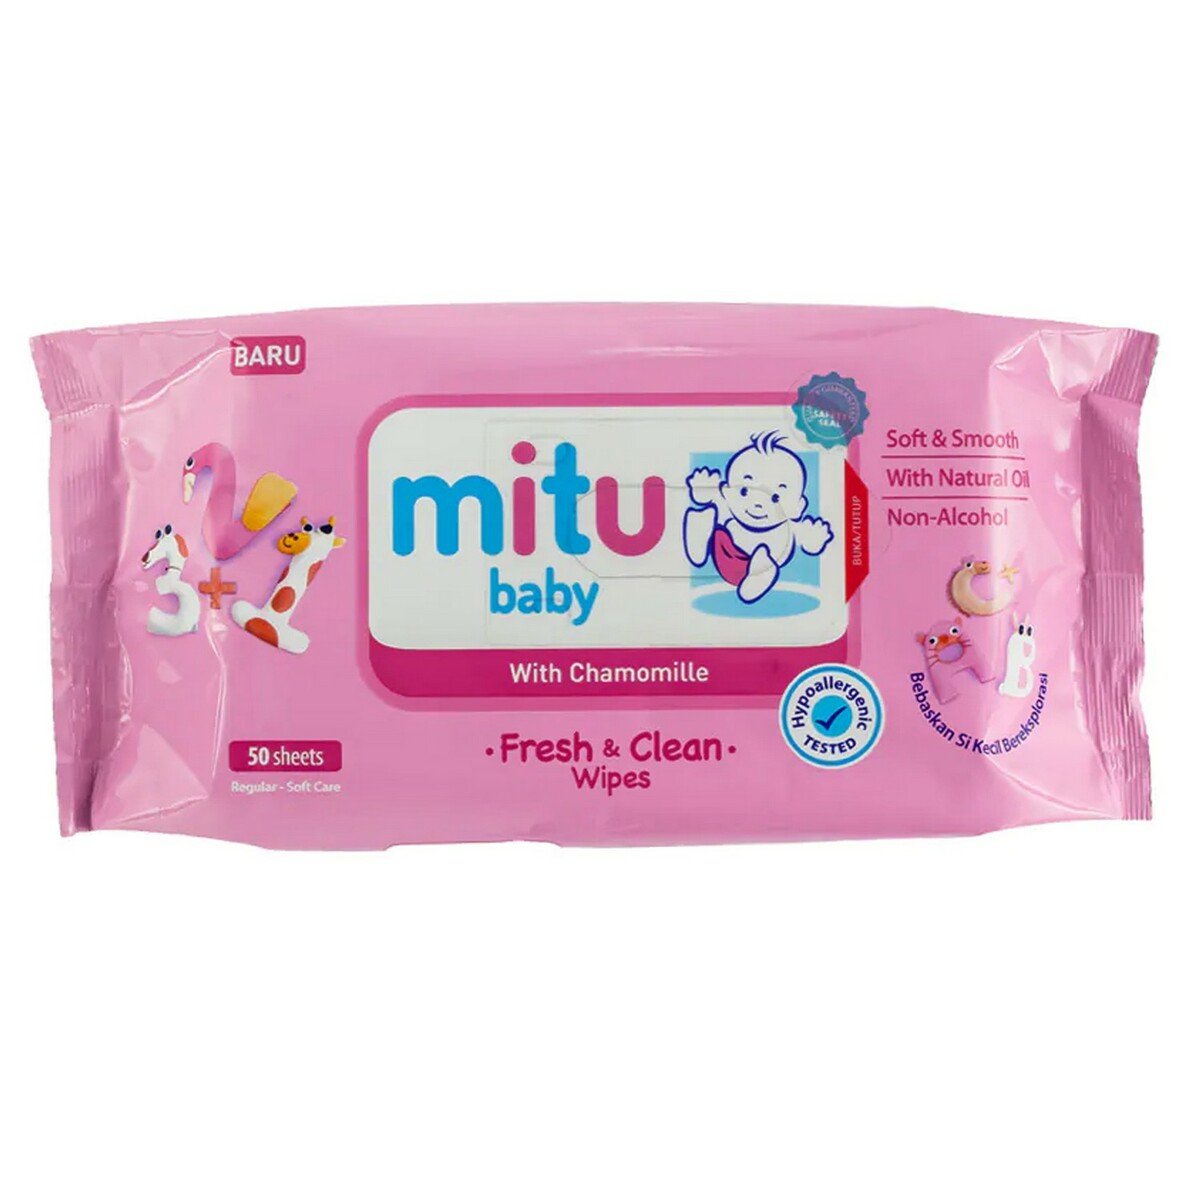 Mitu Baby Soft Care Wipes Pink 50s